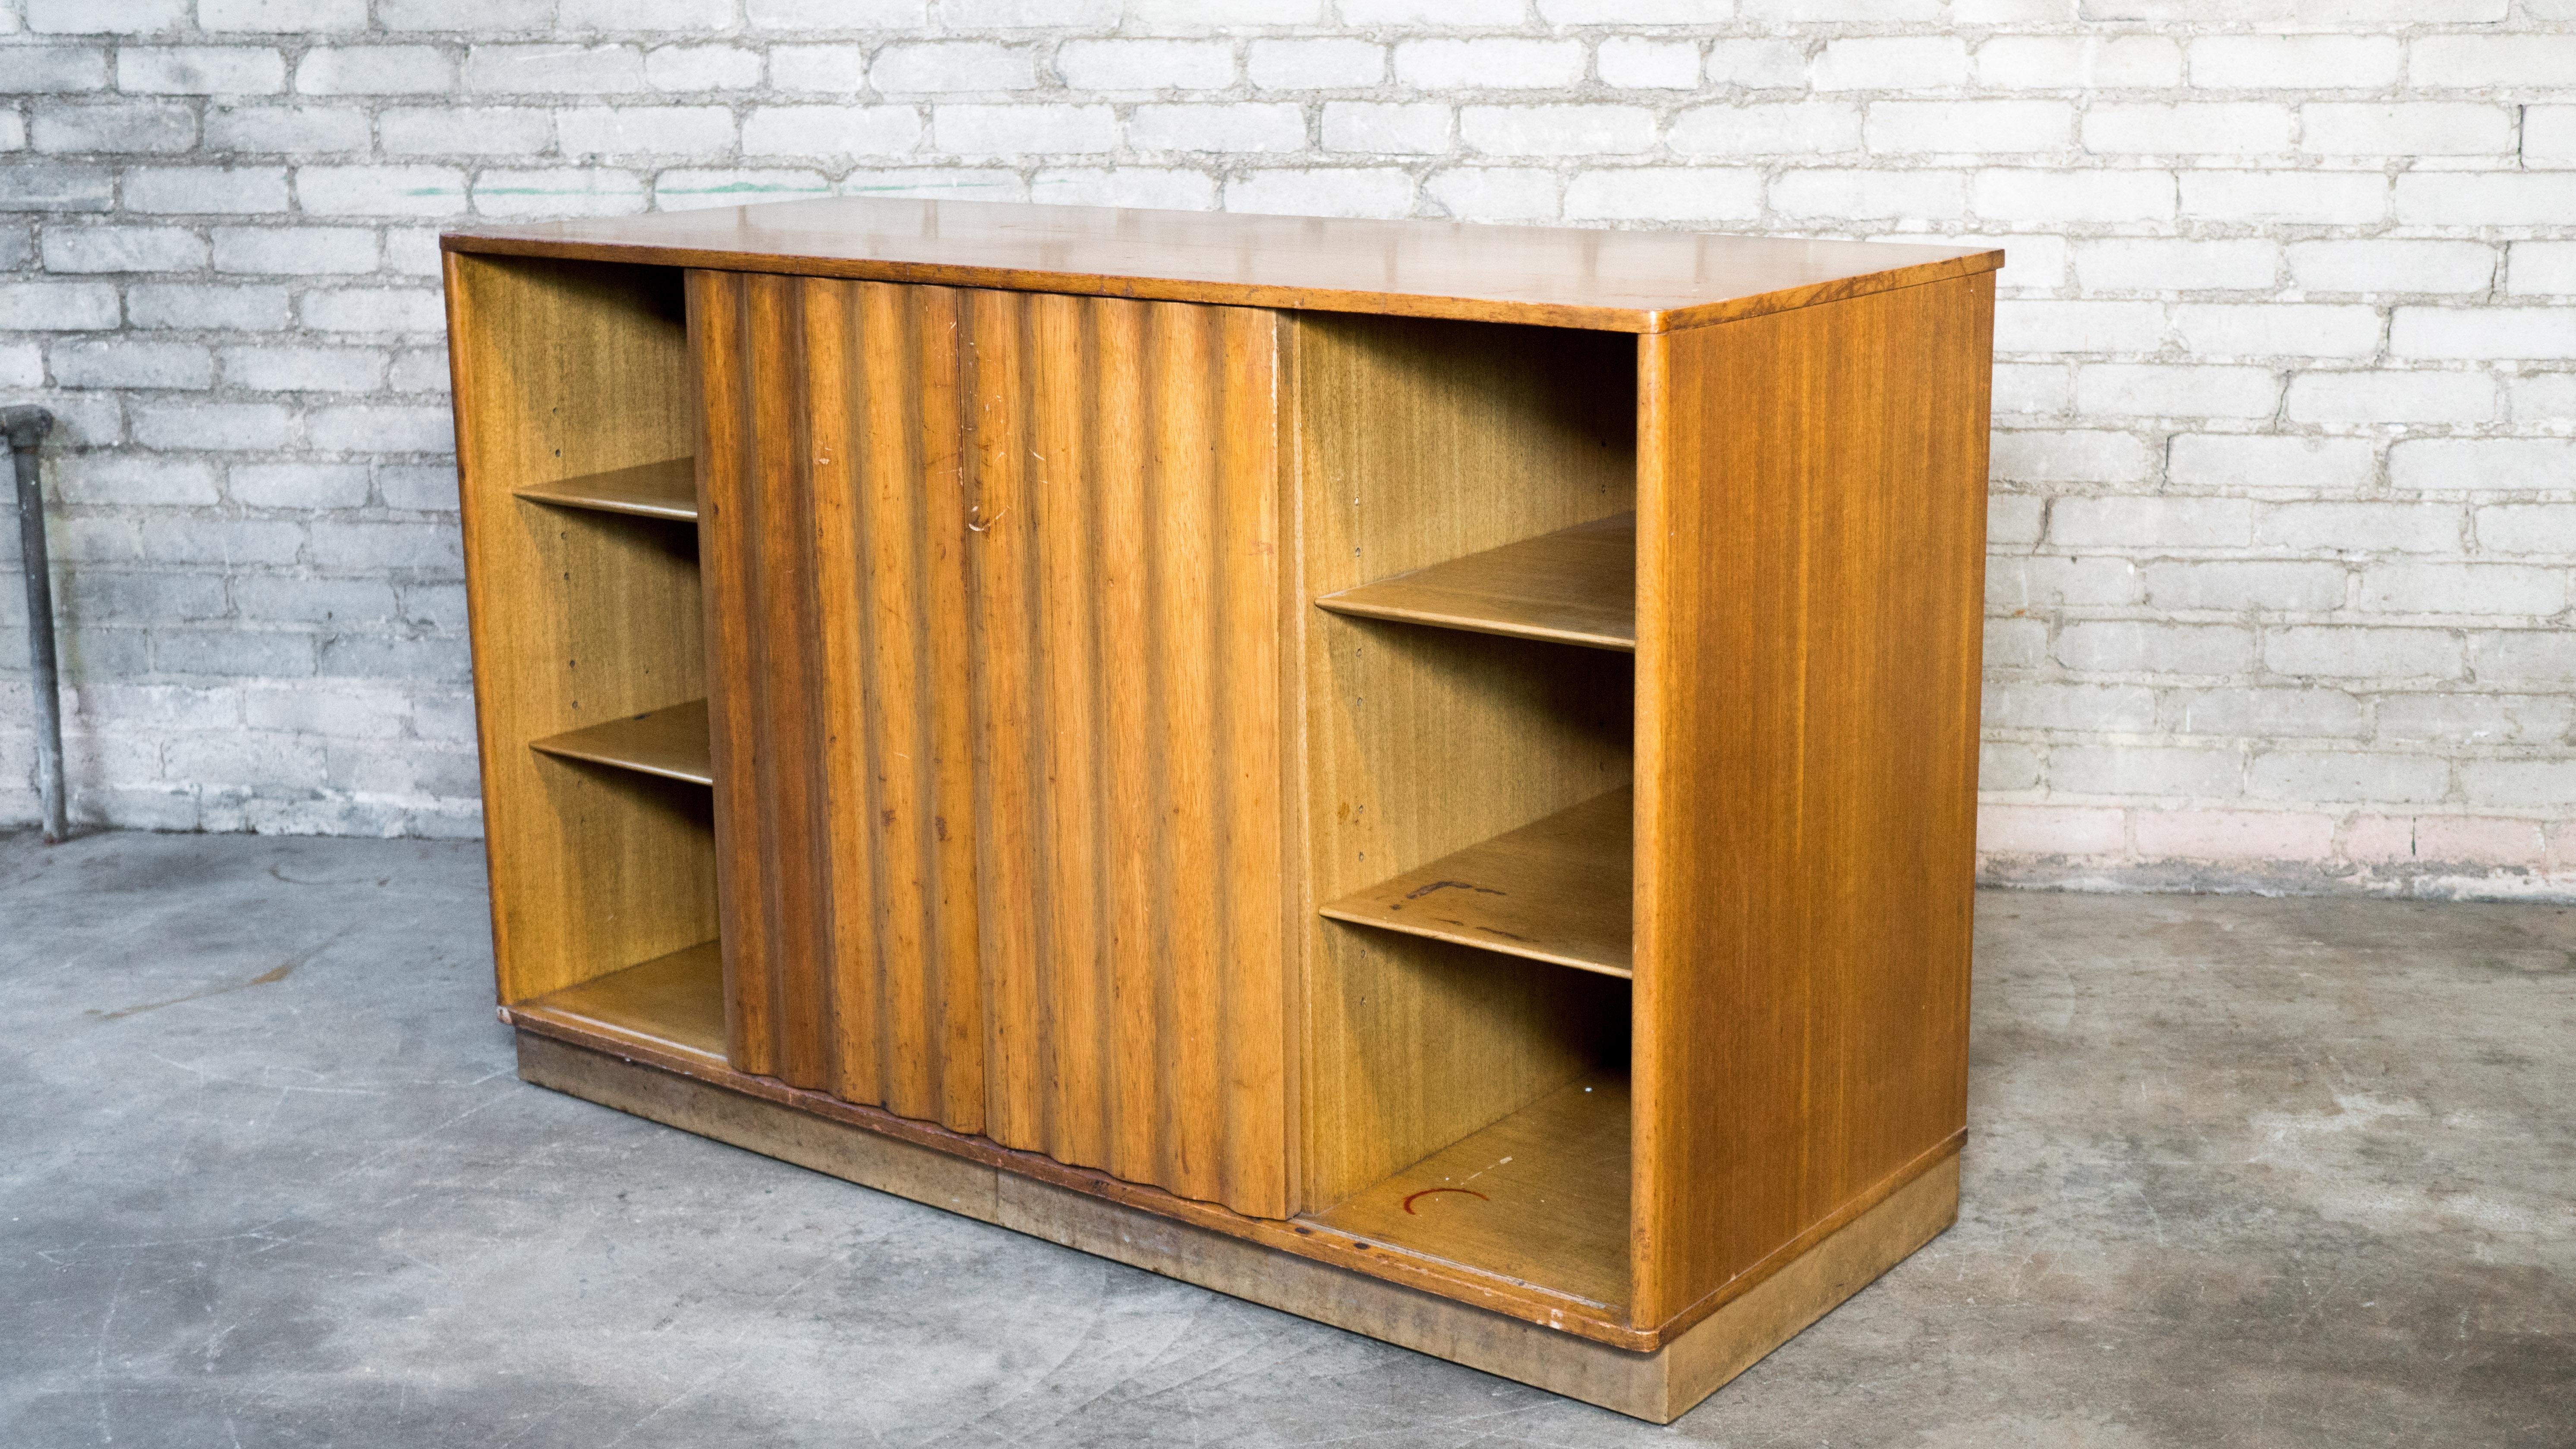 Edward Wormely for Dunbar credenza or sideboard, circa 1950s. Presented in mahogany, showing lovely woodgrain details. Wave form sliding doors flank the center drawers. Beautiful craftsmanship. Dovetail joints, adjustable selves. Leather wrapped